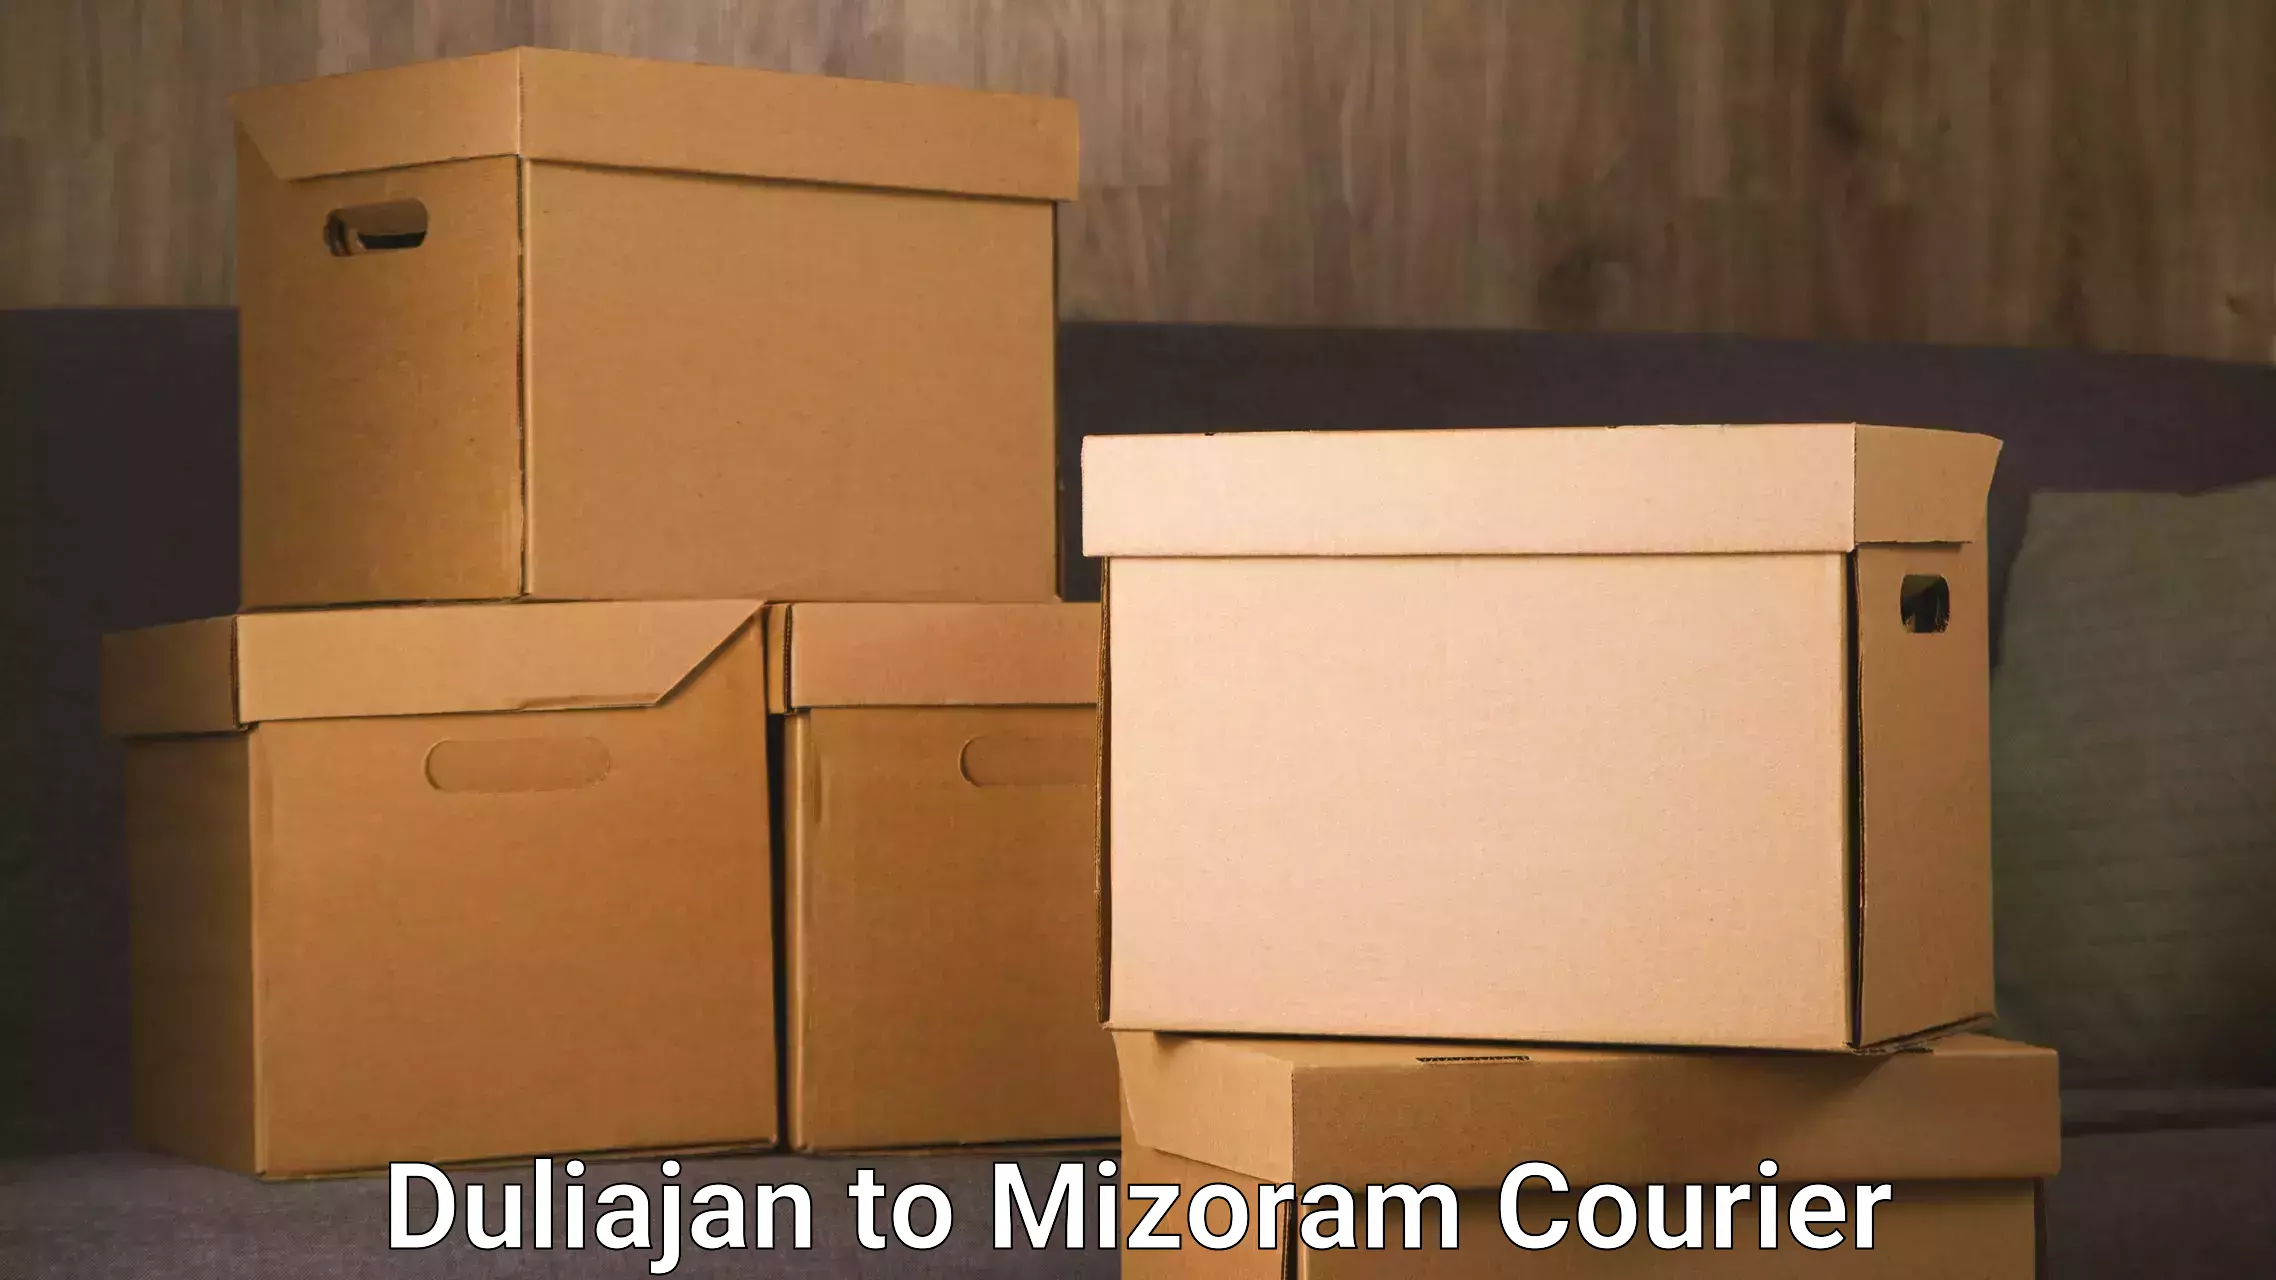 Reliable parcel services Duliajan to Siaha